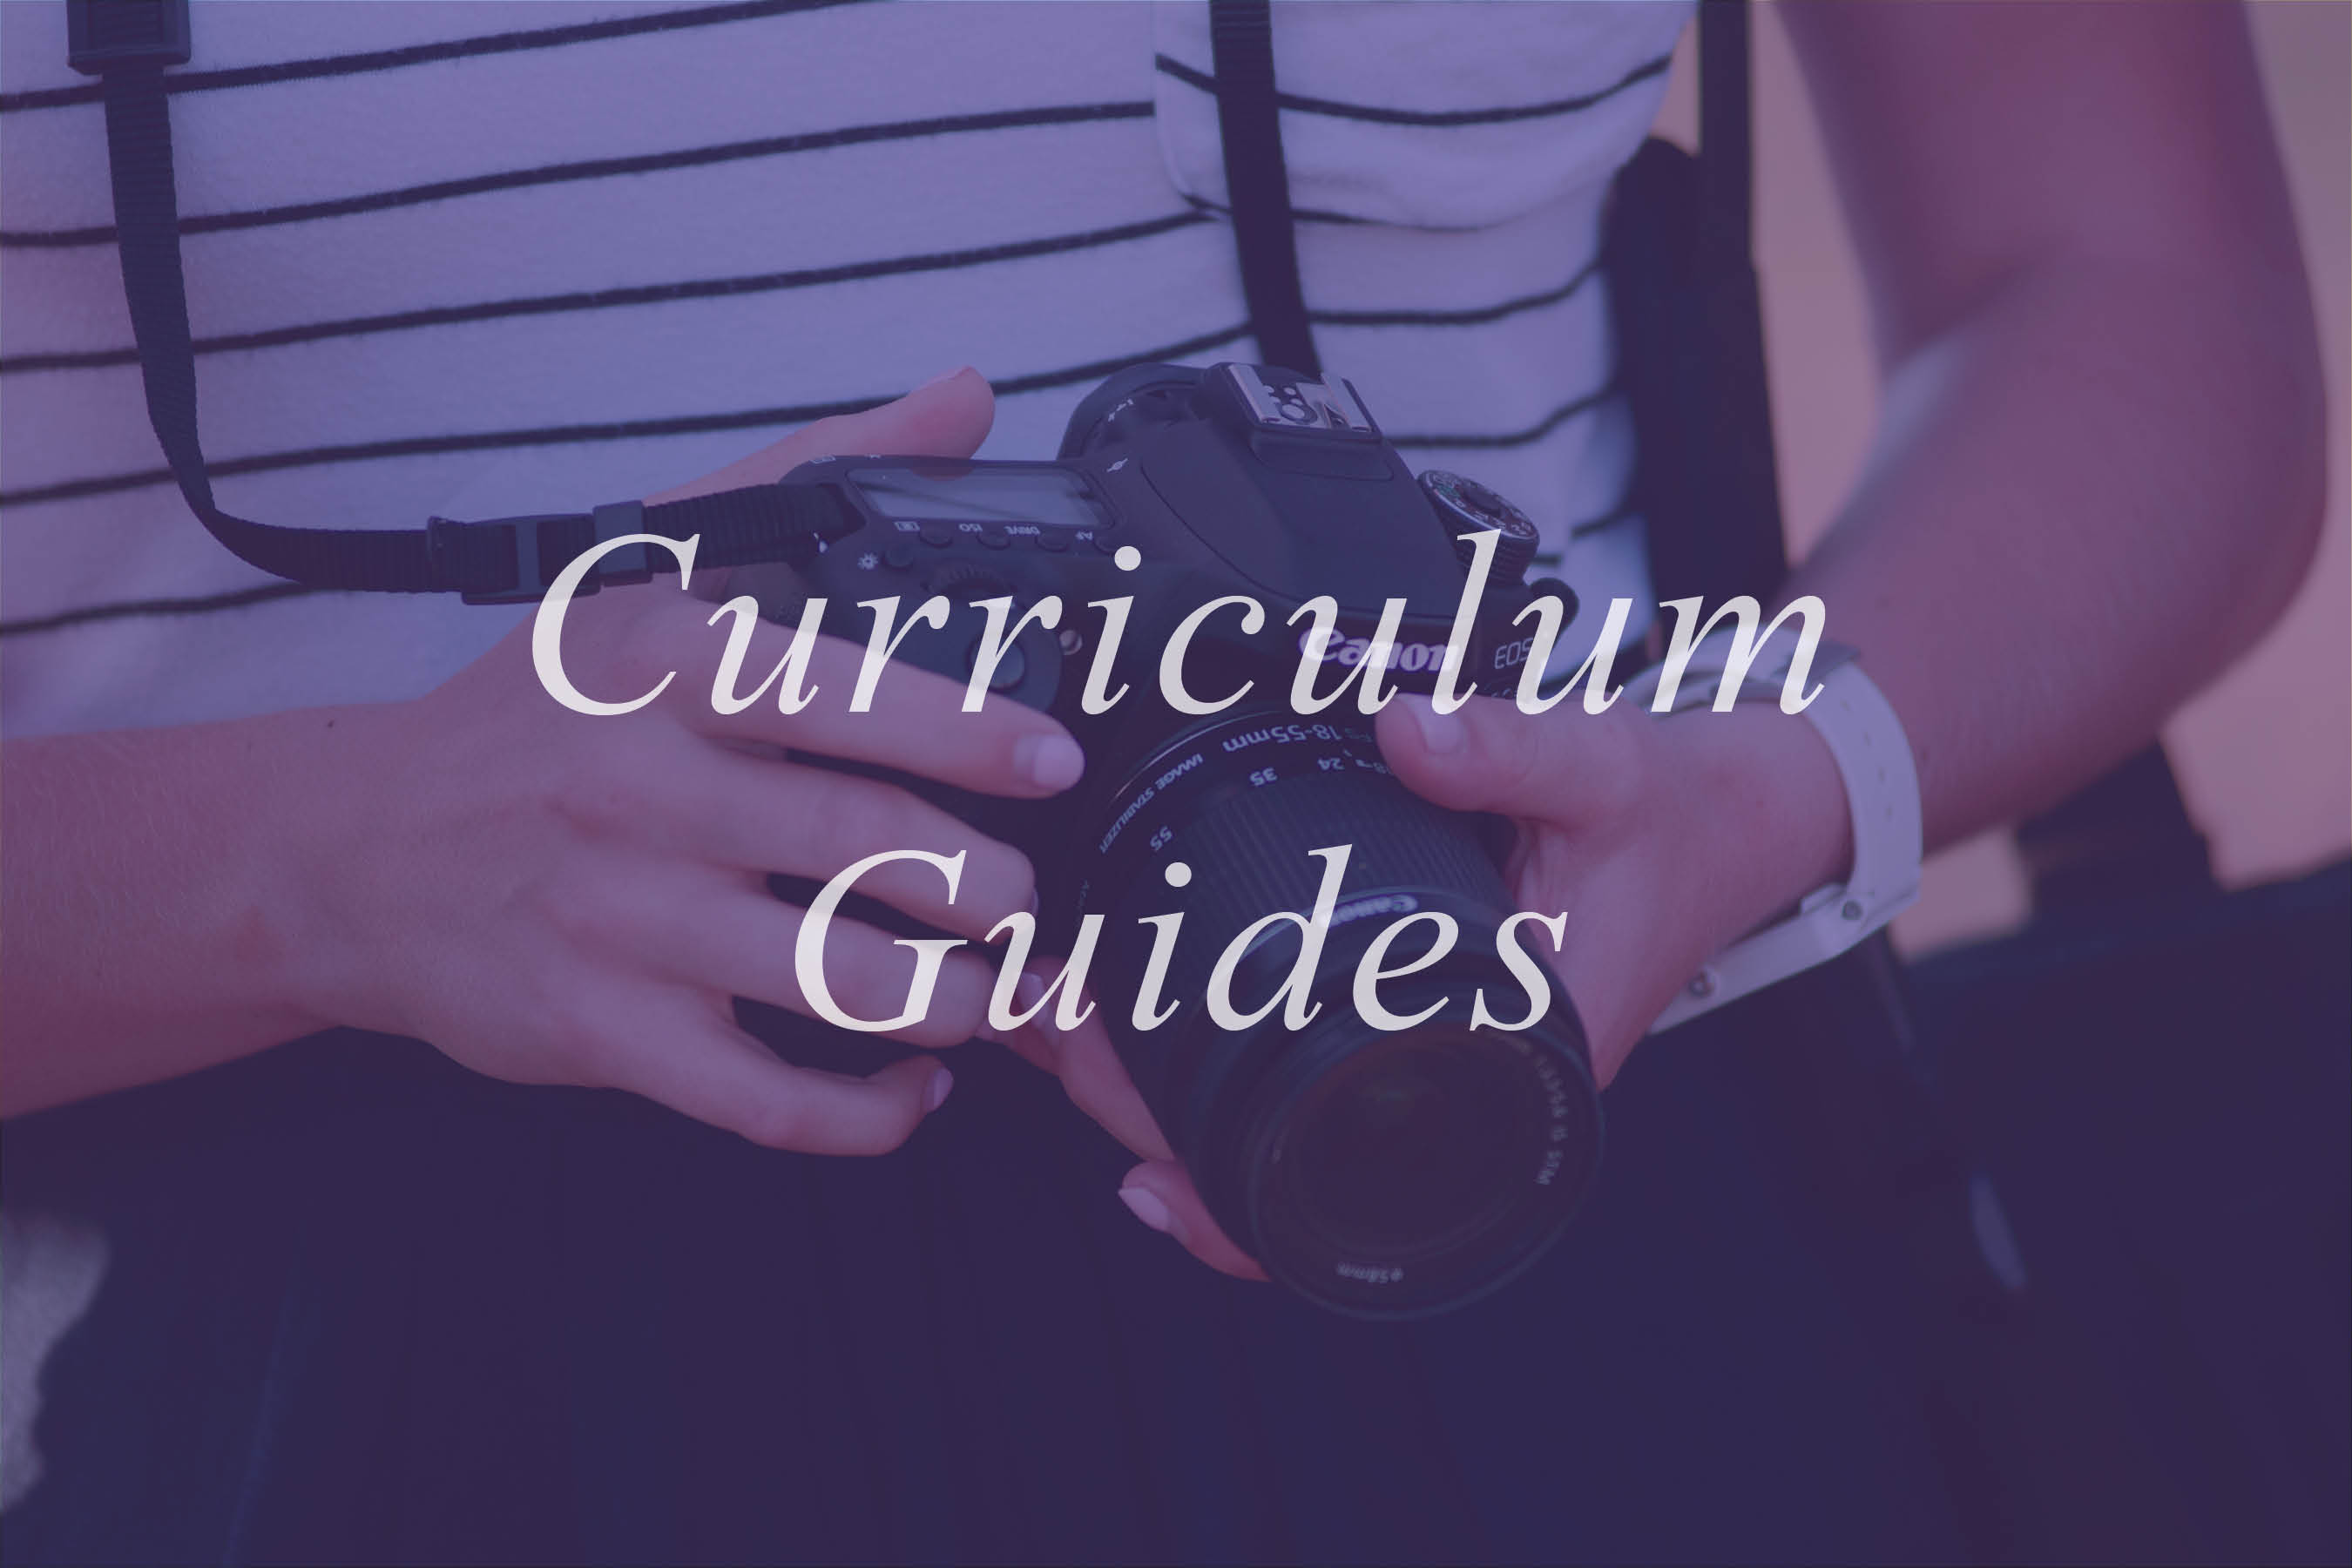 Button leads to ACJ Curriculum Guides